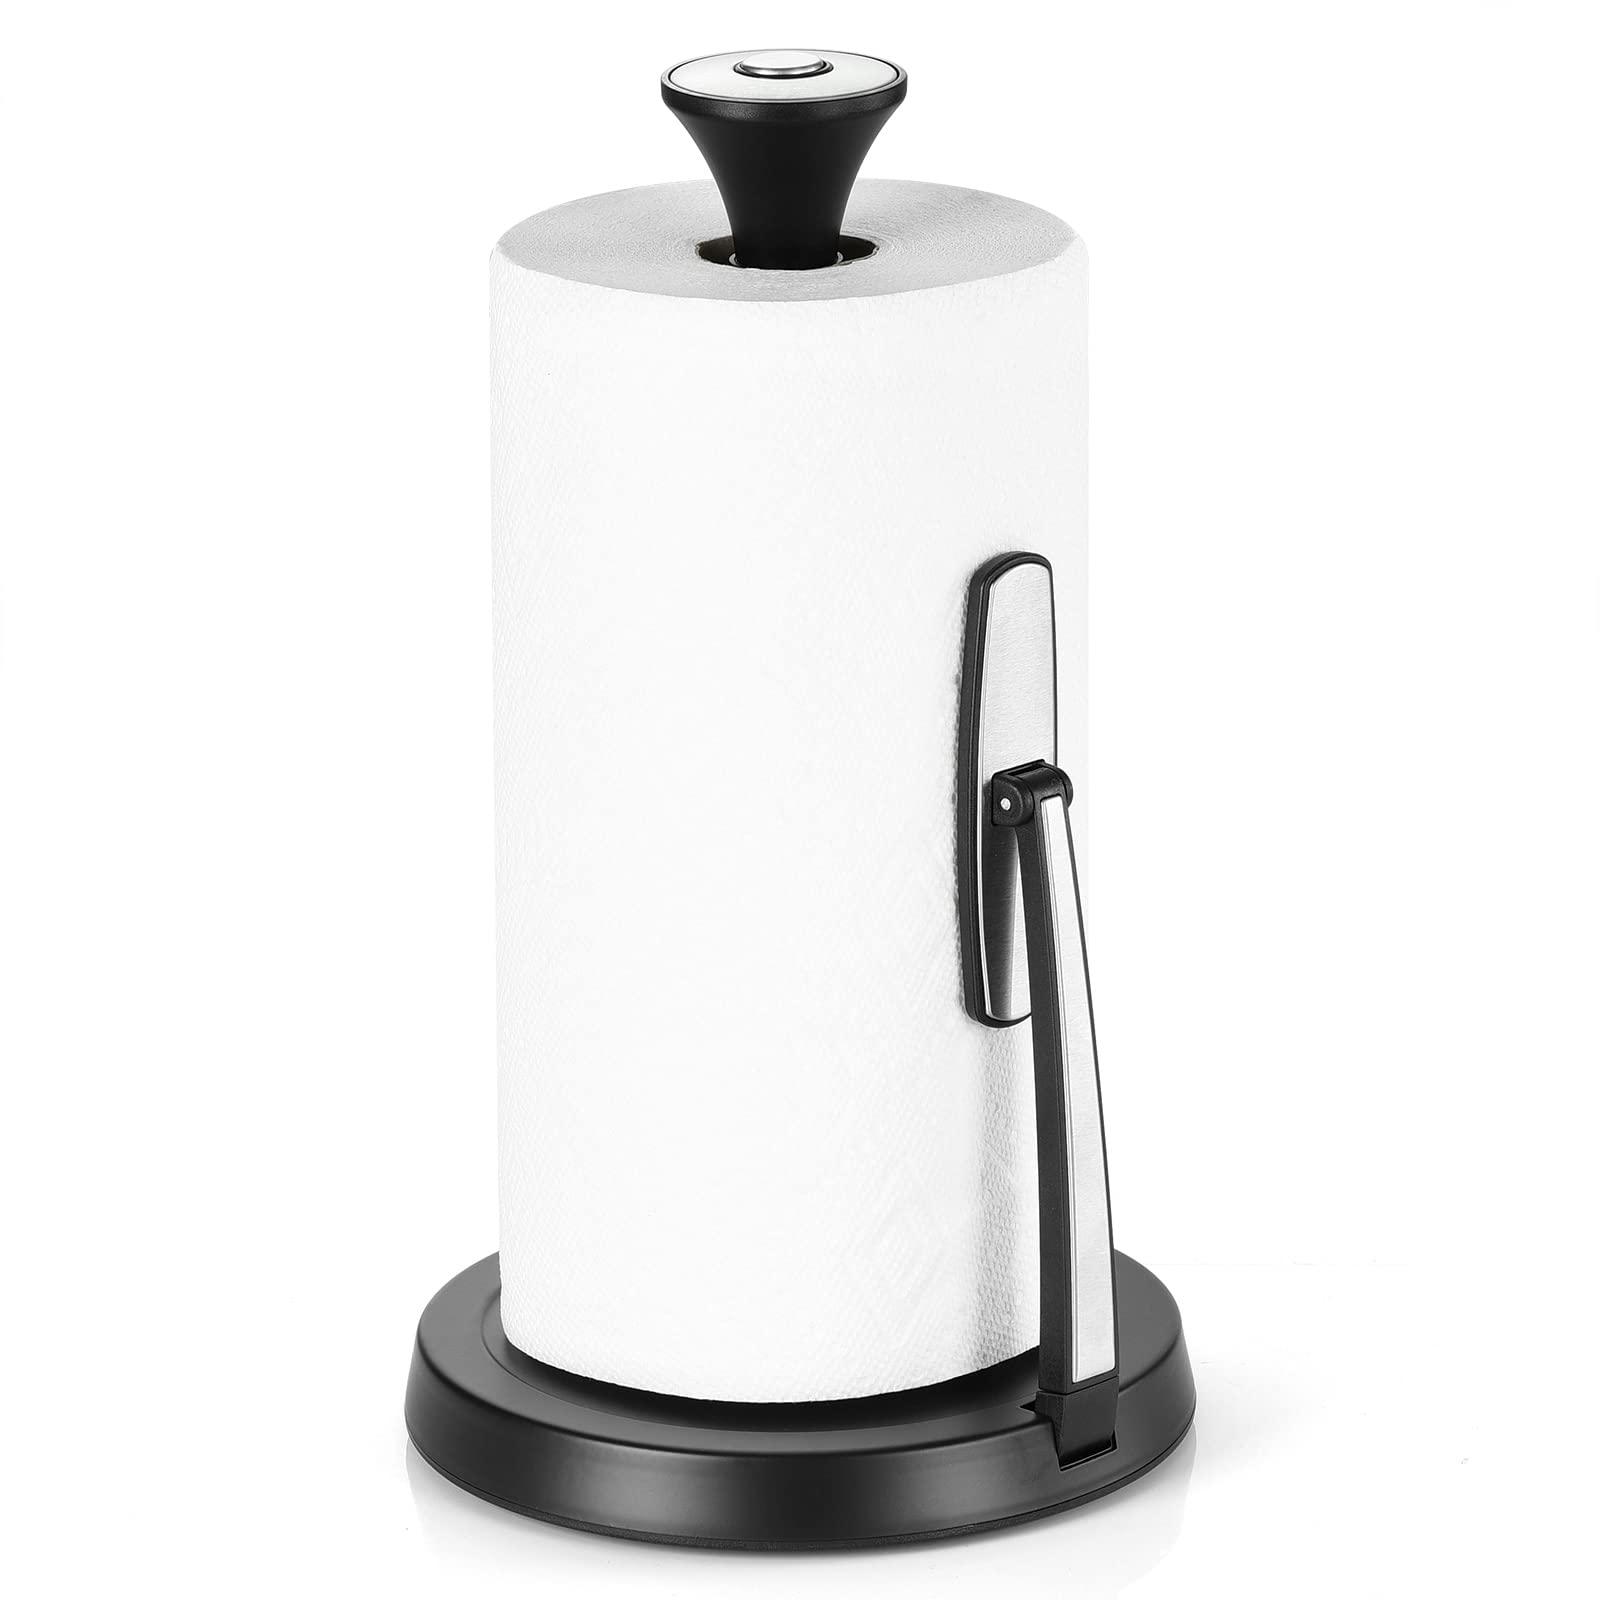 hystun standing , tension arm , stainless steel single tear paper towel holder countertop roll dispenser for kitchen countert